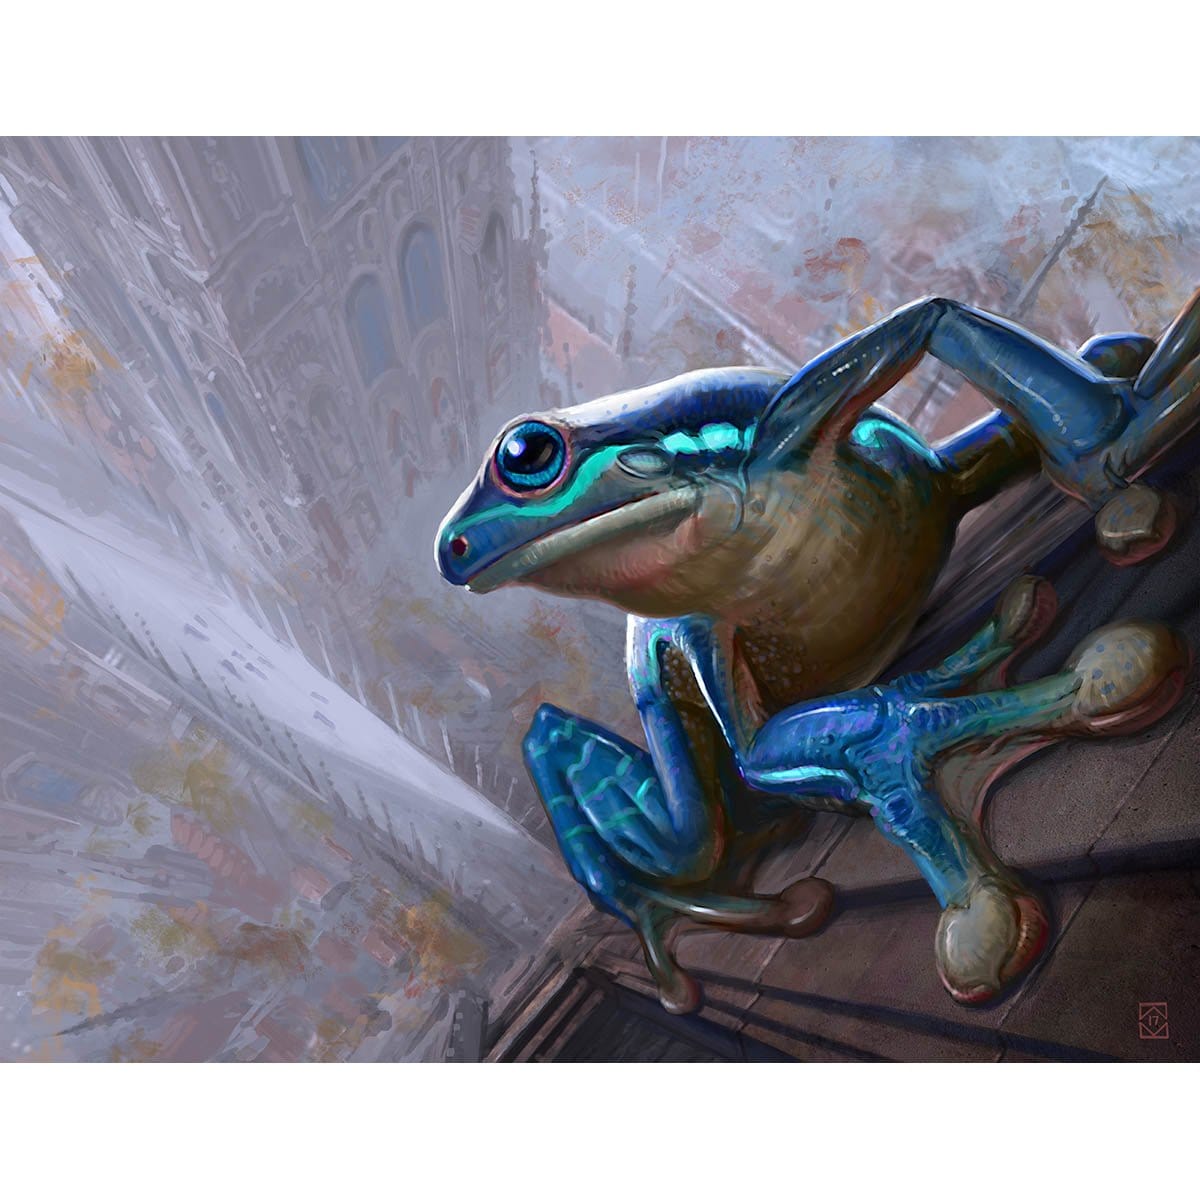 Leapfrog Print - Print - Original Magic Art - Accessories for Magic the Gathering and other card games